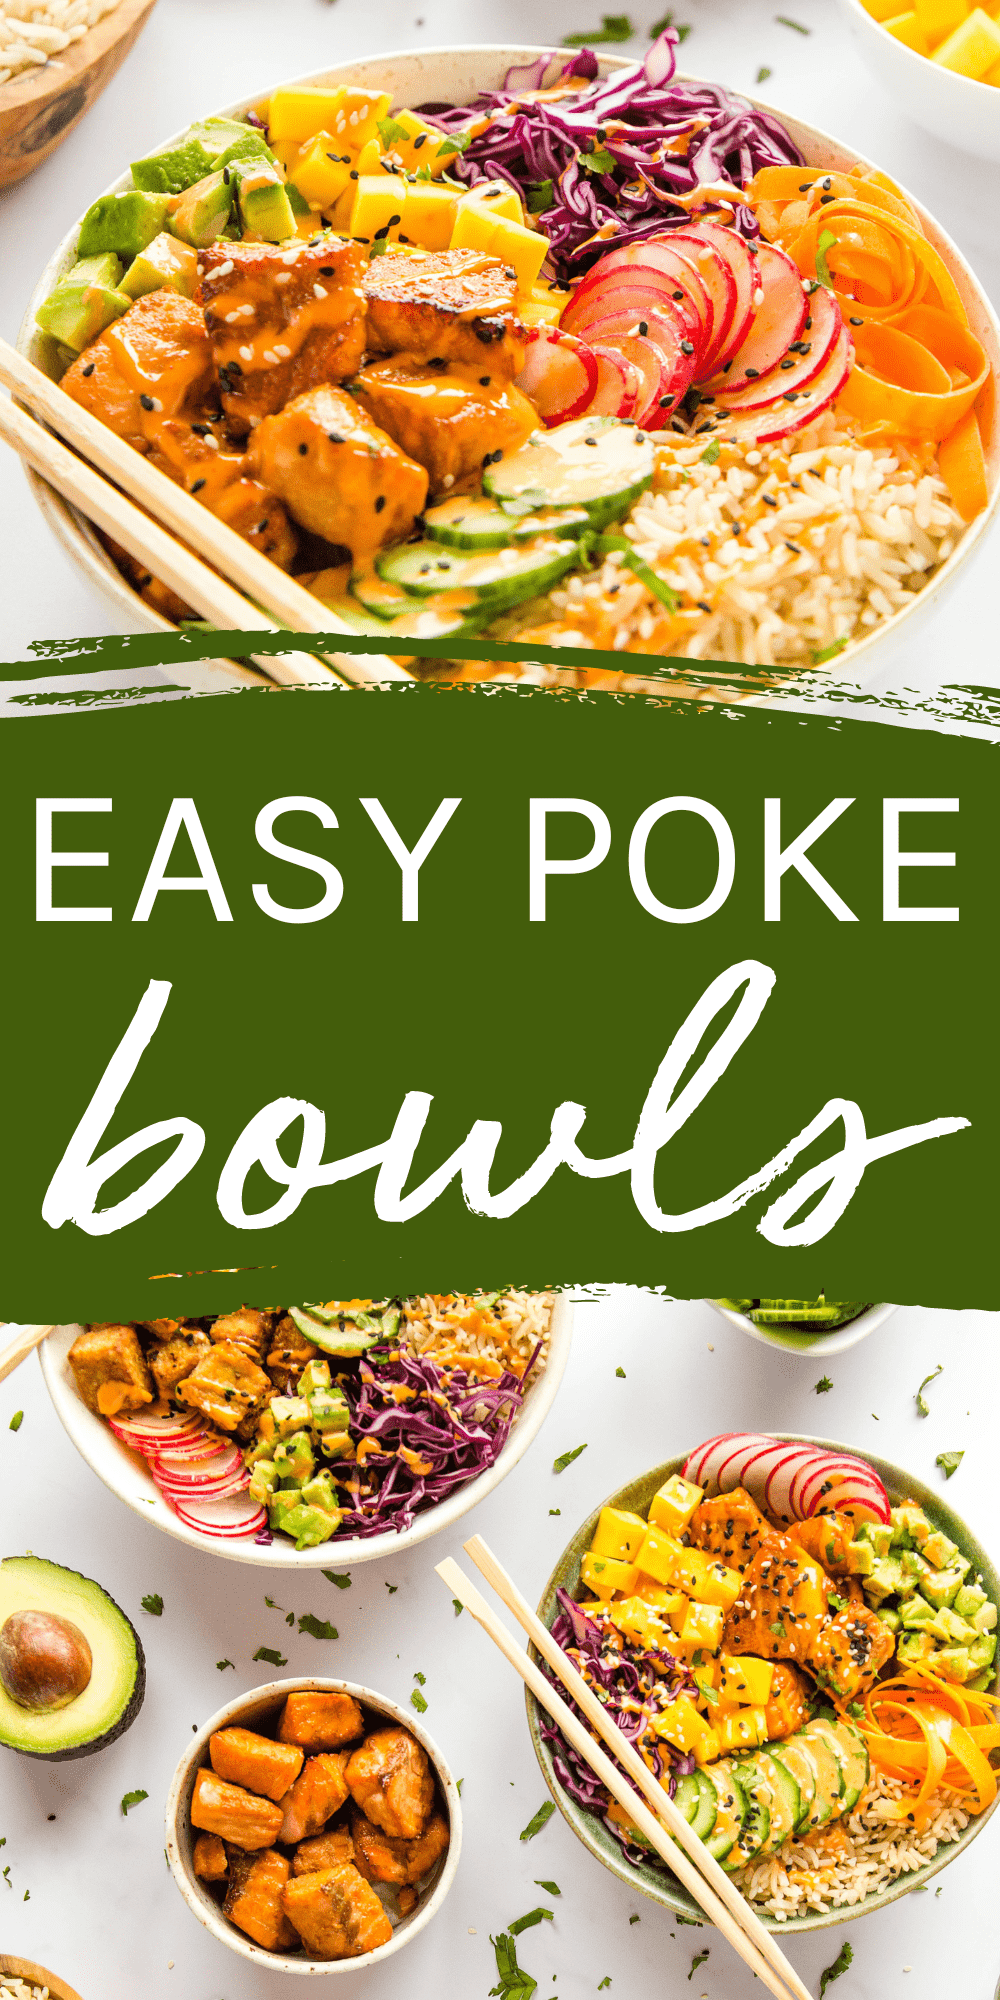 This Poke Bowl Recipe is the perfect fresh and healthy meal! A twist on the Hawaiian classic, made with veggies, crispy salmon or tofu, & brown rice - perfect for meal prep! Recipe from thebusybaker.ca! #pokebowl #pokebowls #hawaiianpokebowl #easypokebowl #veganpokebowl #pokebowlrecipe #howtomakepokebowls #healthy #fresh #plantbased #grainfree #health via @busybakerblog